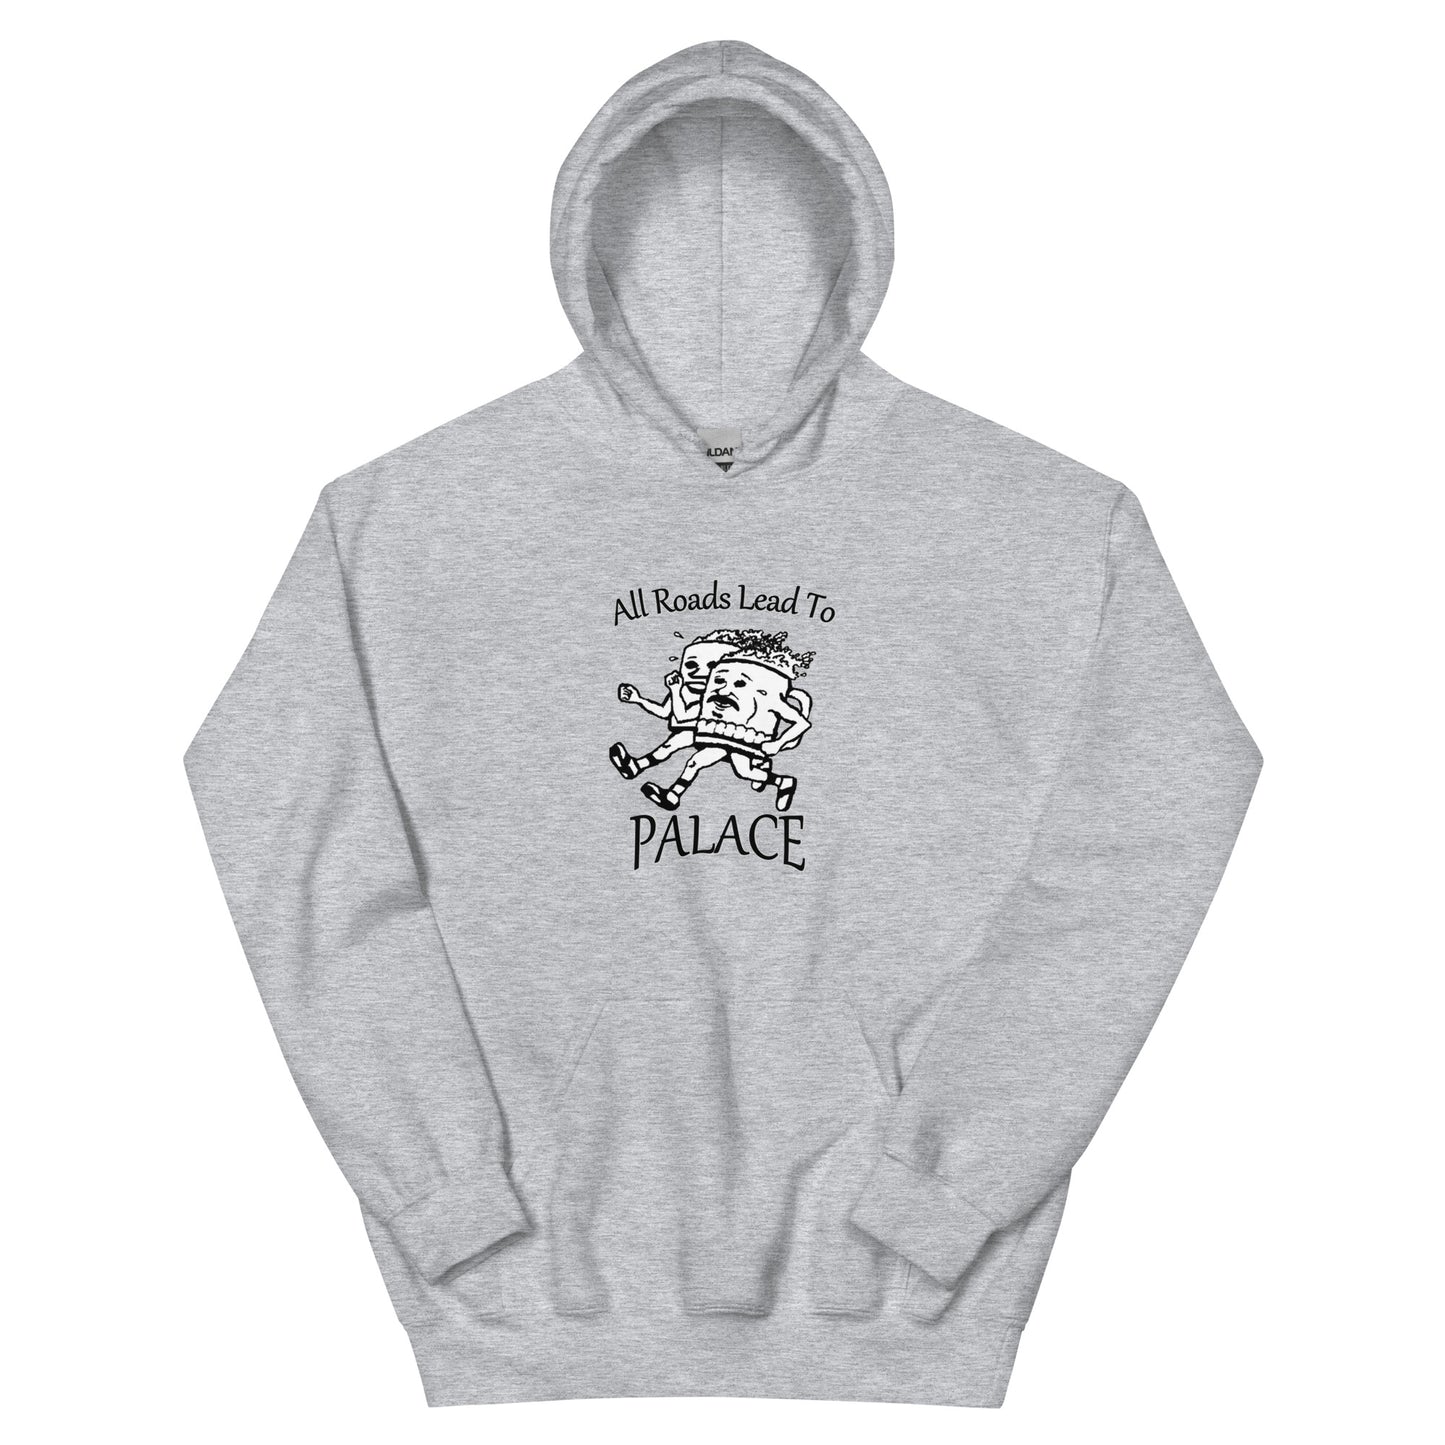 All Roads Lead To Palace Unisex Hoodie